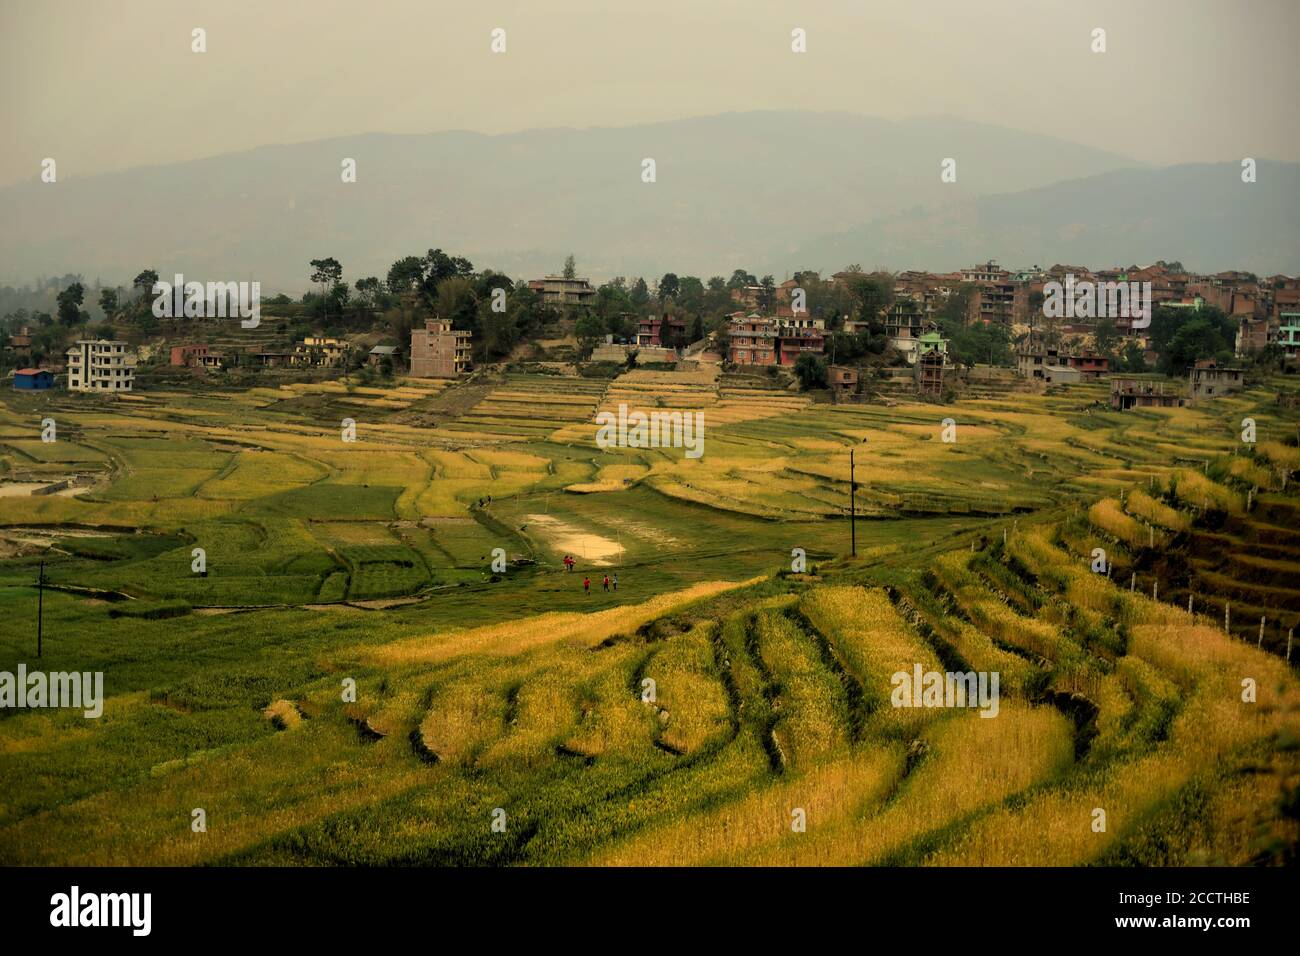 Agricultural terraces in Kathmandu Valley on the outskirts of Kathmandu, seen from a road leading to Dhulikhel, Bagmati Pradesh, Nepal. Stock Photo